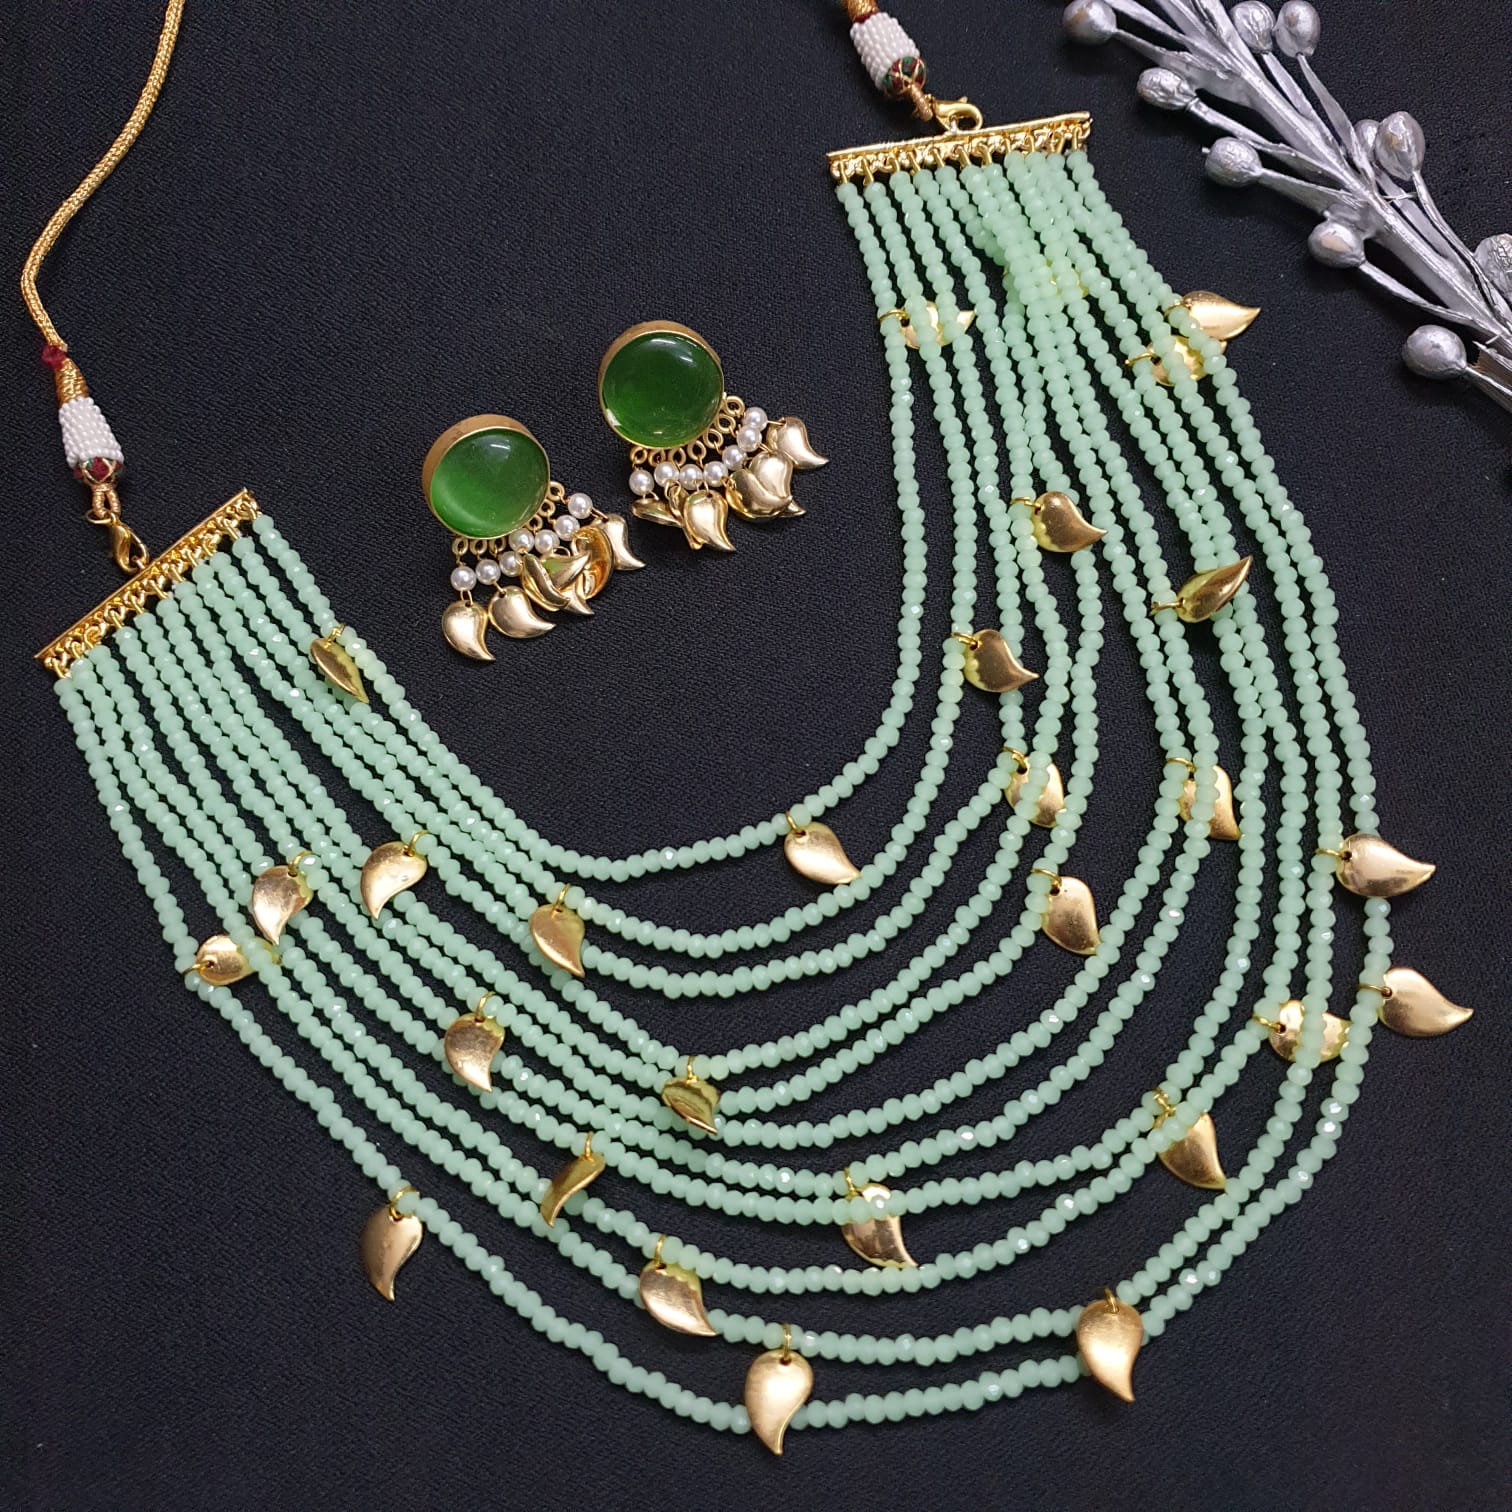 Multilayered Golden Petals Necklace With Earrings